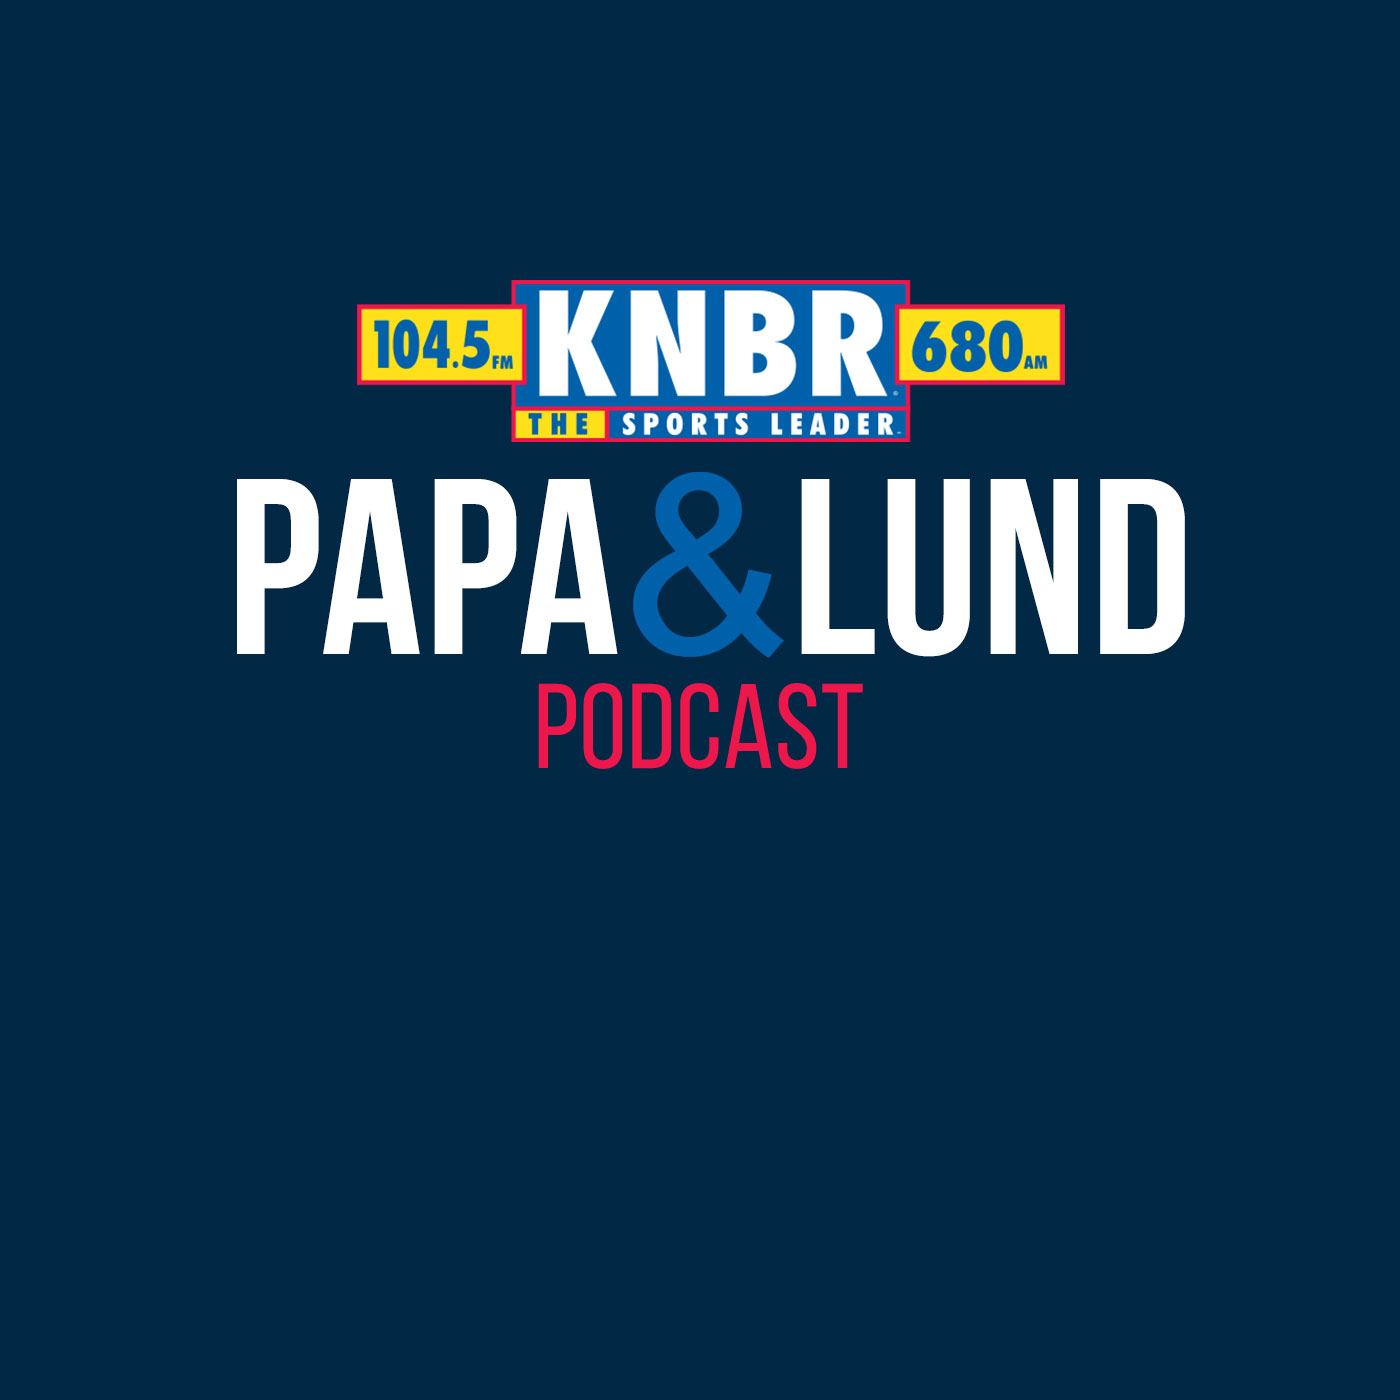 10-31 Mike Tannenbaum joins Papa & Lund to break down the latest trade rumors as the Trade Deadline approaches